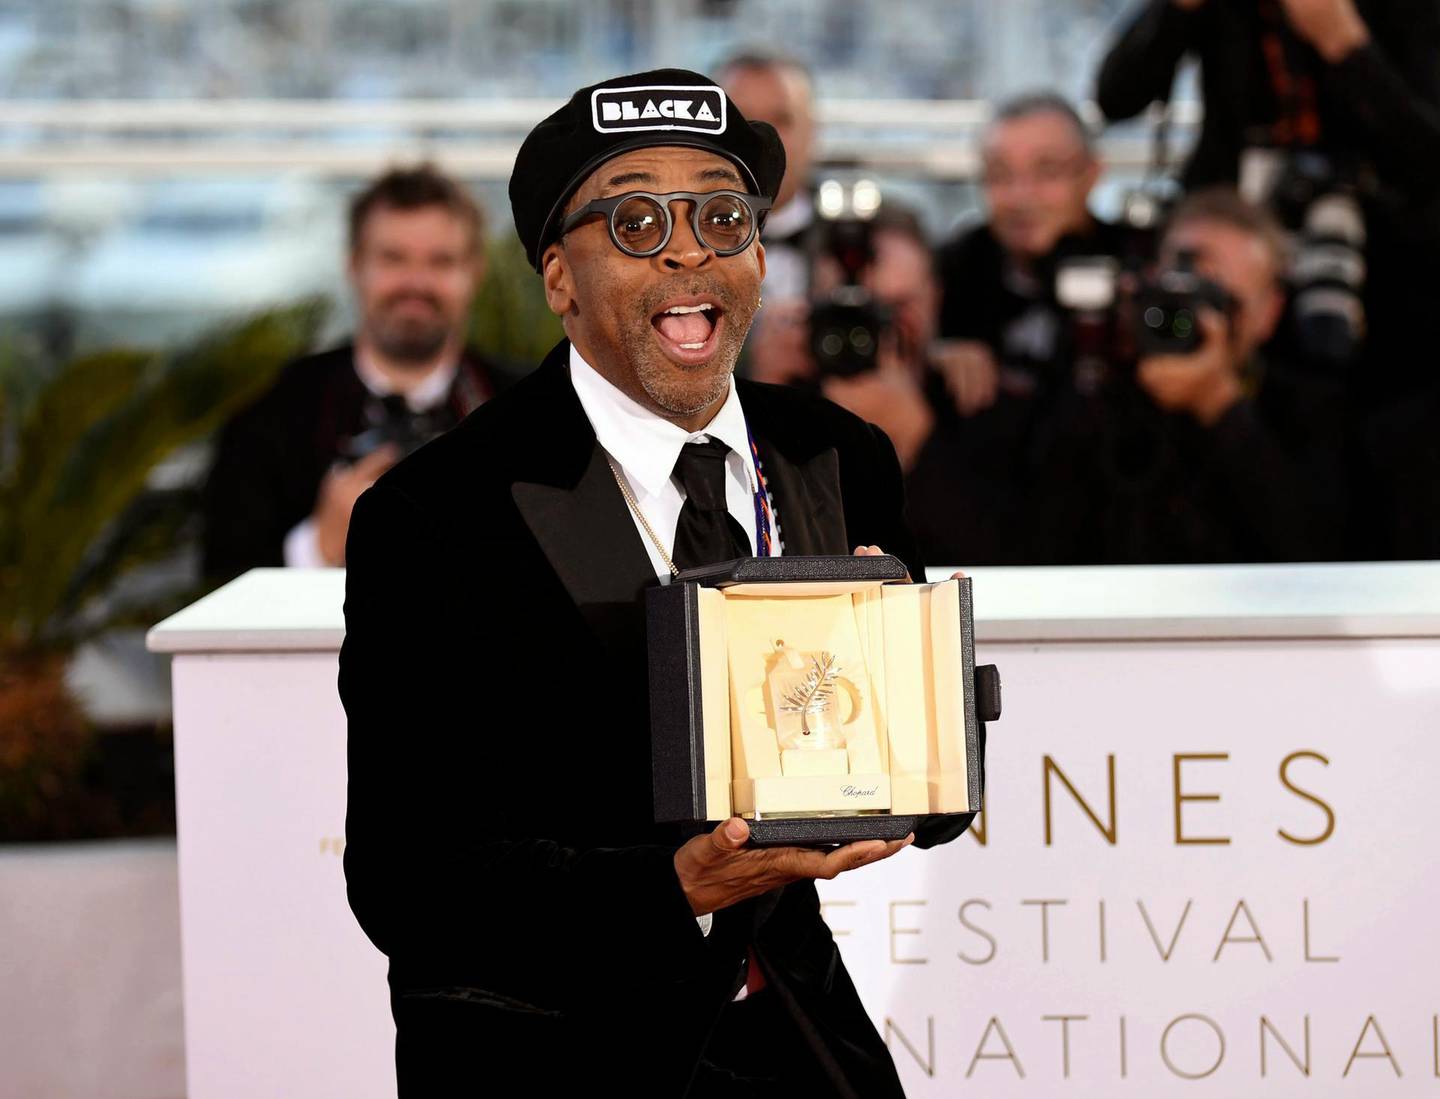 FILE - In this May 19, 2018 file photo, director Spike Lee holds the Grand Prix award for the film "BlackKklansman" following the awards ceremony at the 71st international film festival, Cannes, southern France.  Lee is releasing his film this weekend, a year after the violent clashes in Charlottesville in which anti-racism activist Heather Heyer was run over and killed. Leeâ€™s film is about an earlier chapter in white supremacism and the Ku Klux Klan: when African-American police detective Ron Stallworth infiltrated a Colorado Springs, Colorado, chapter of the KKK in 1979.  (Photo by Arthur Mola/Invision/AP, File)